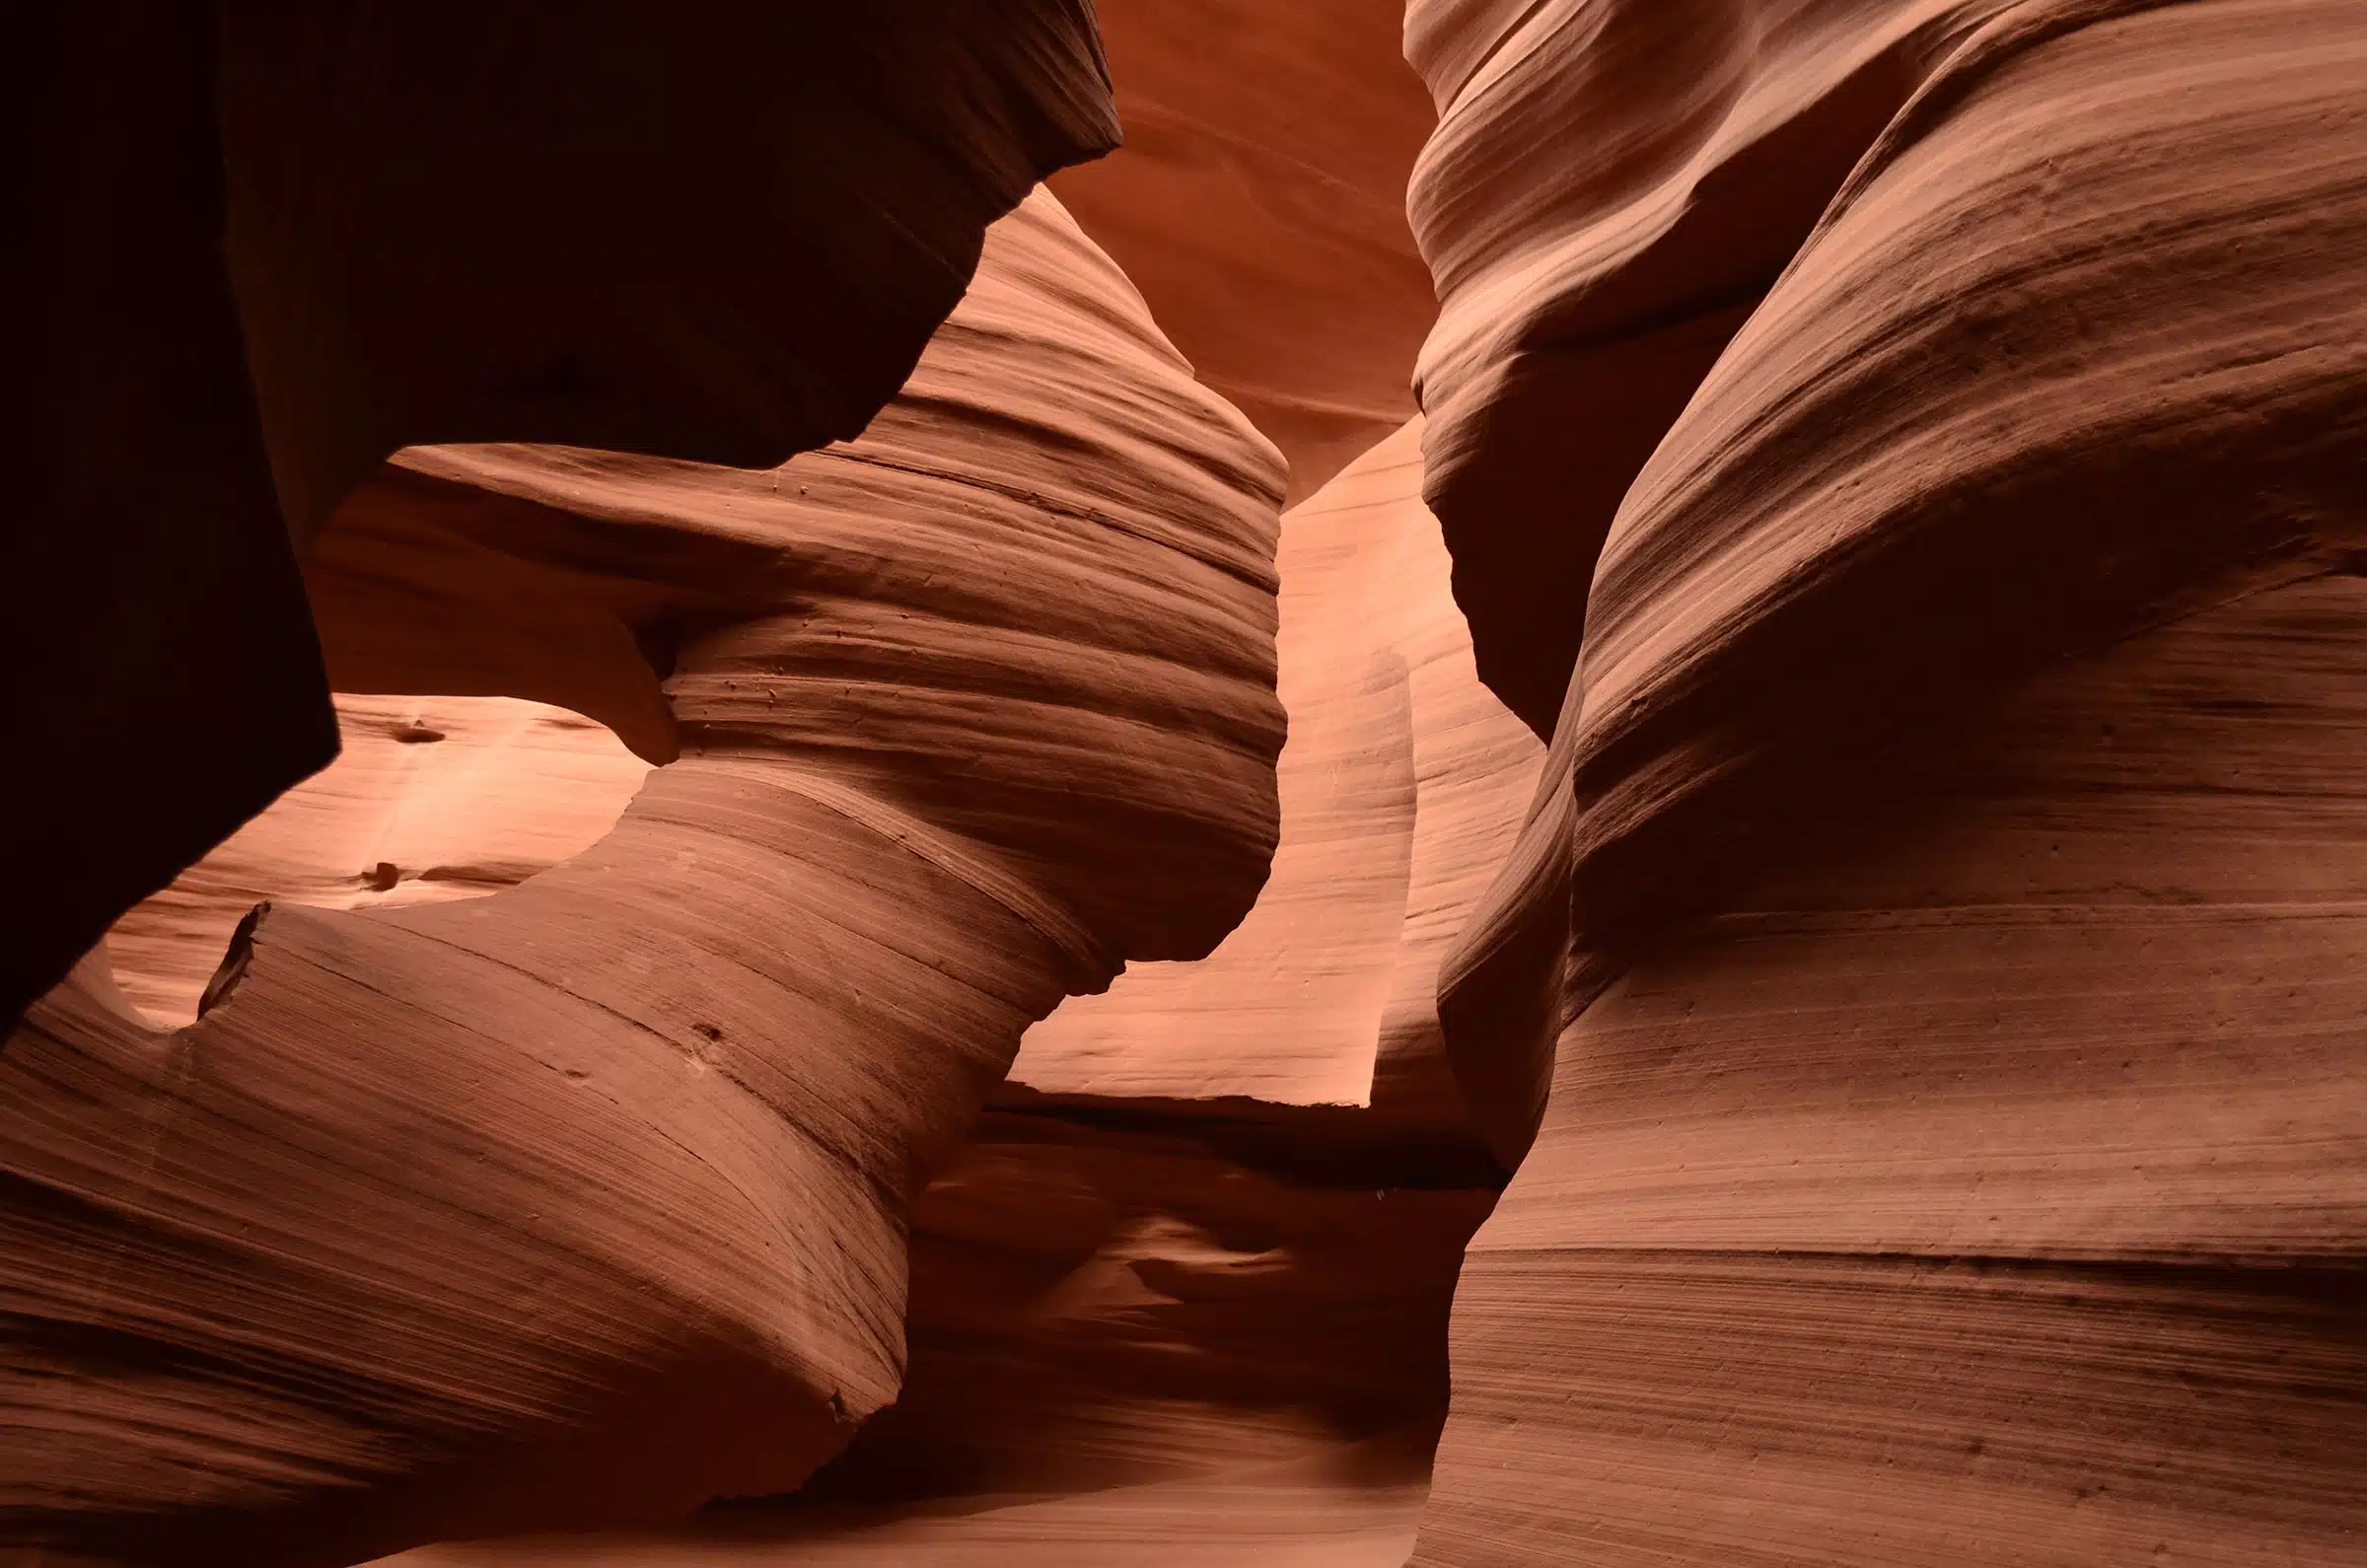 When flowing water meets rocks in the Antelope Canyon